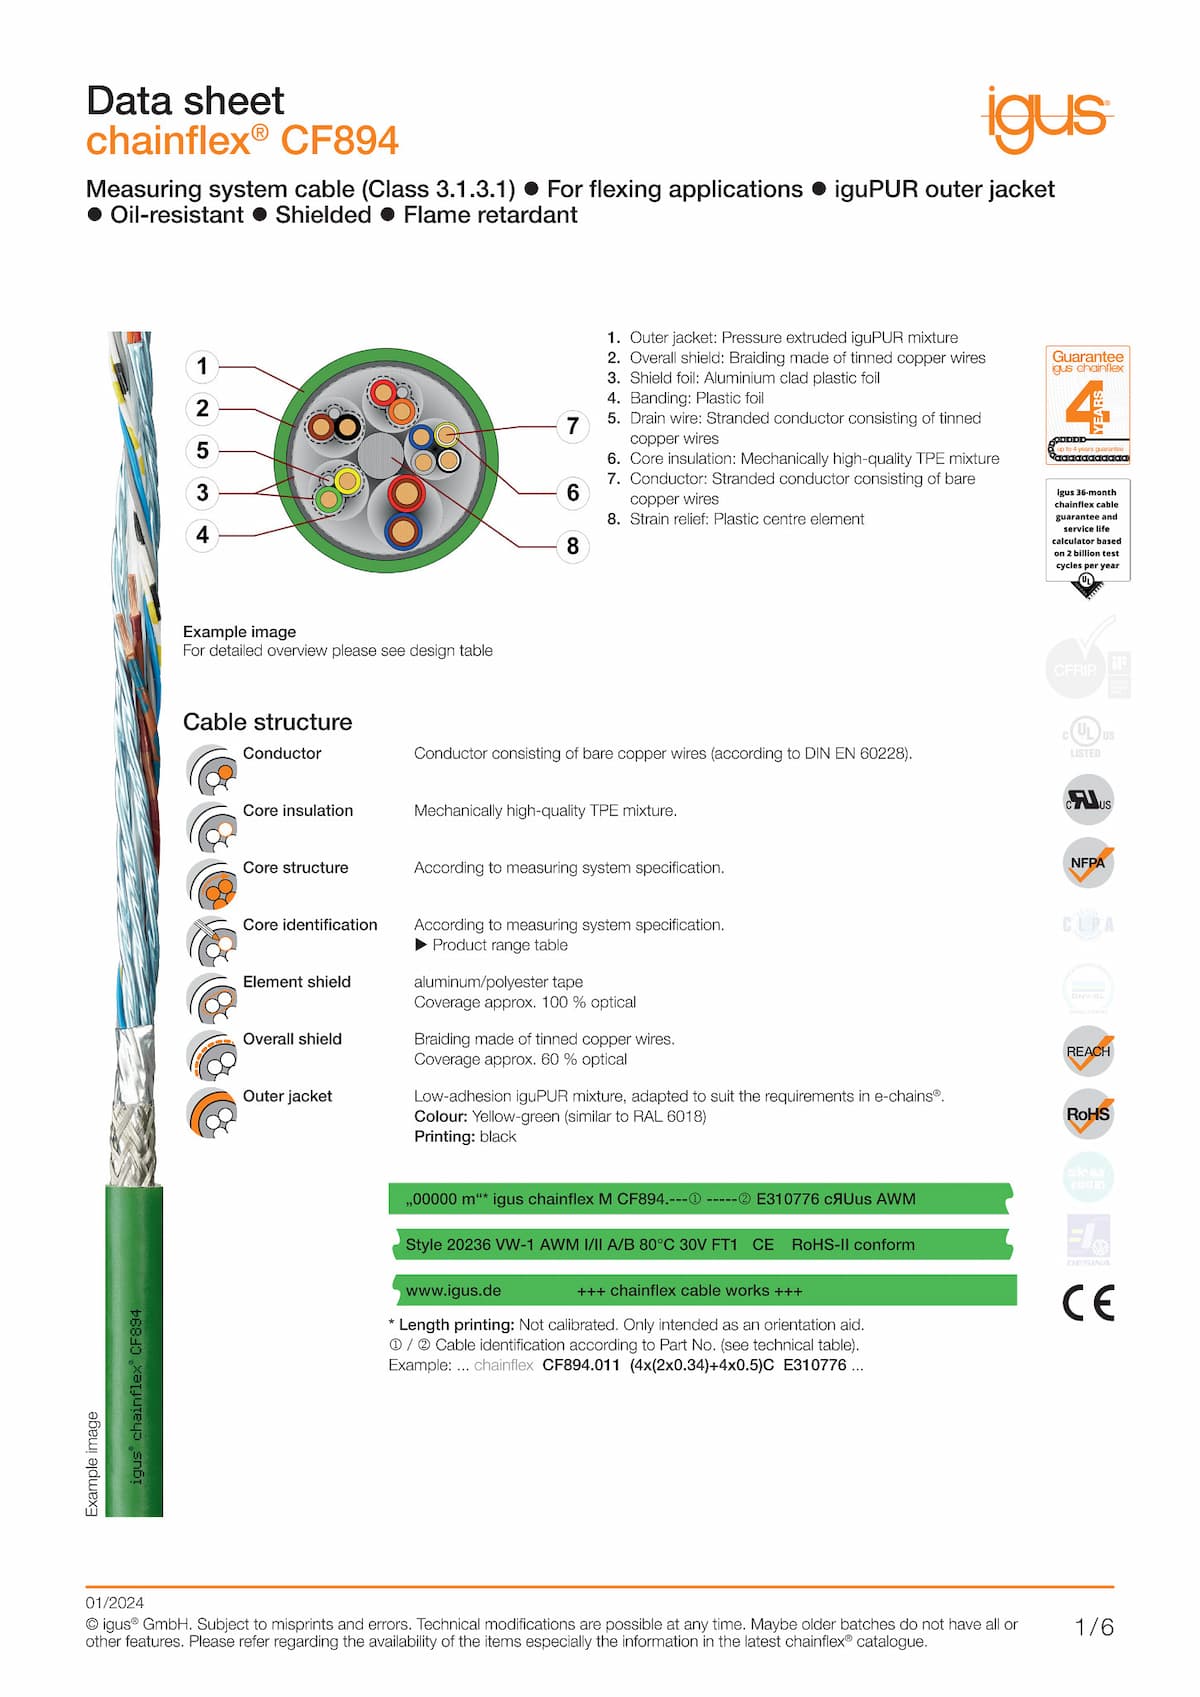 Technical data sheet chainflex® measuring system cable CF894